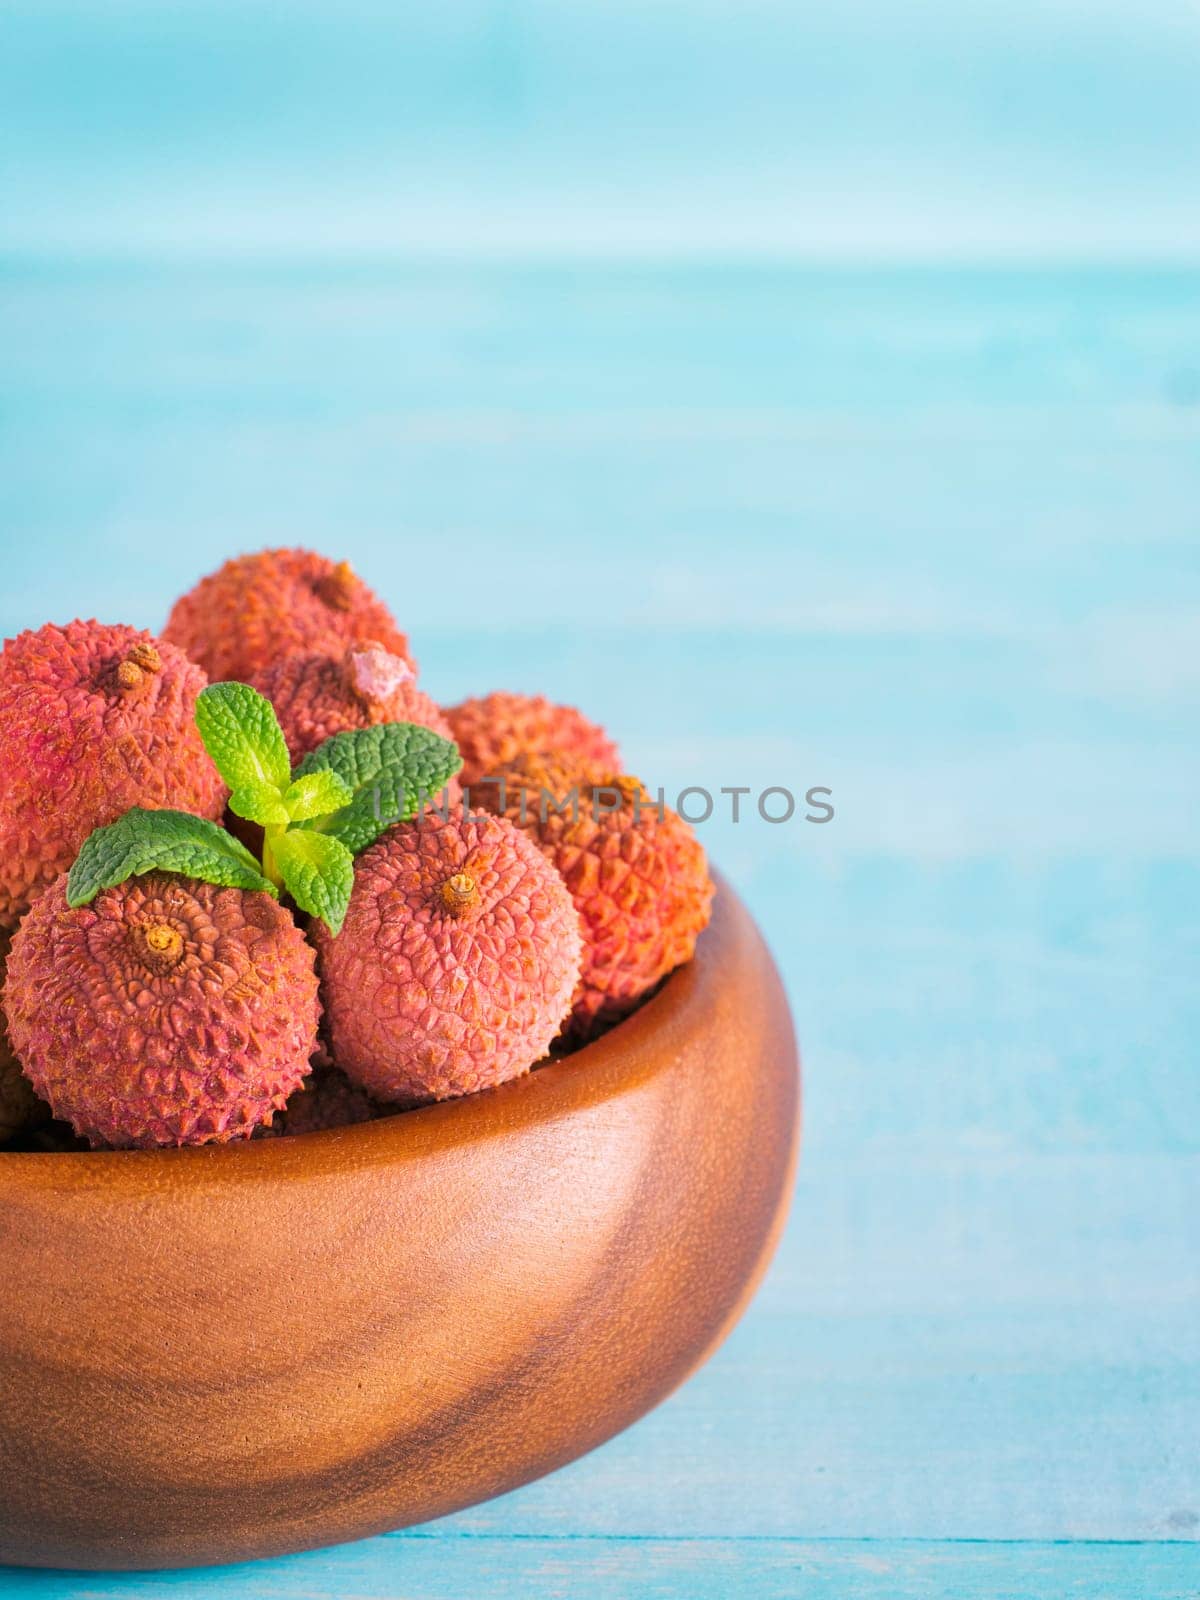 lychee fruit in clay plate on blue wooden background close up